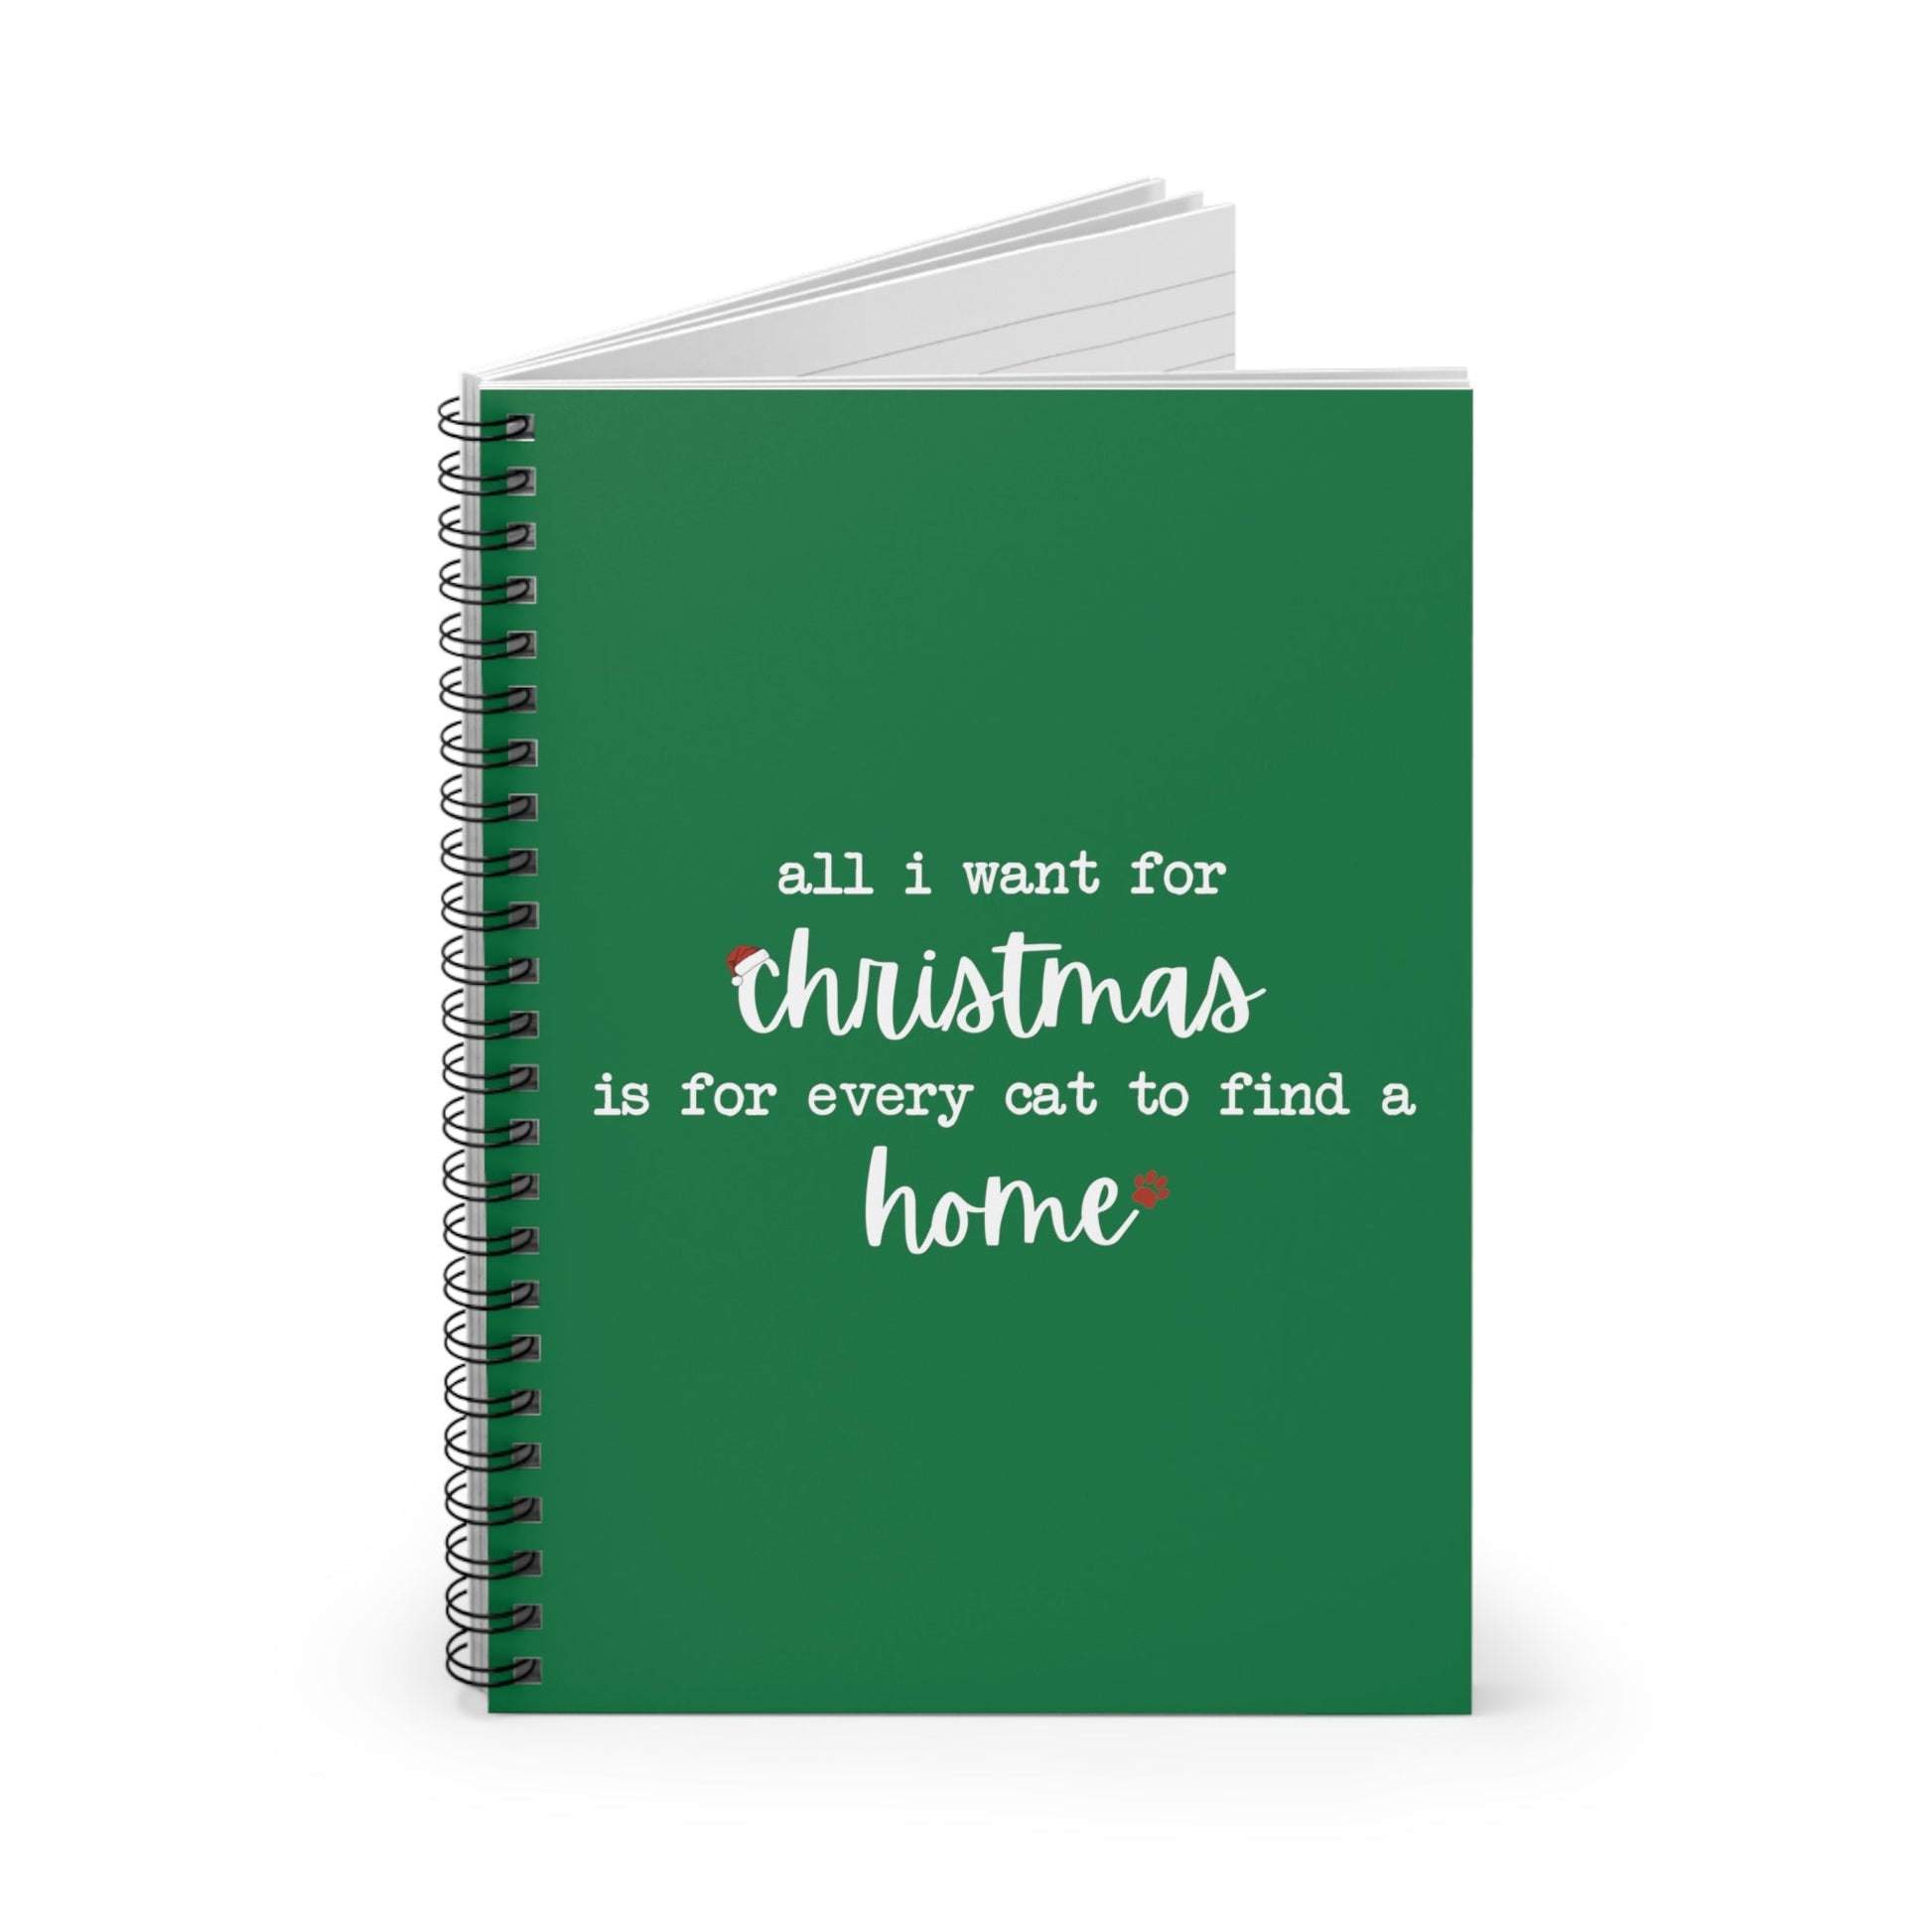 All I Want For Christmas Is For Every Cat To Find A Home | Notebook - Detezi Designs-24519438652457680311